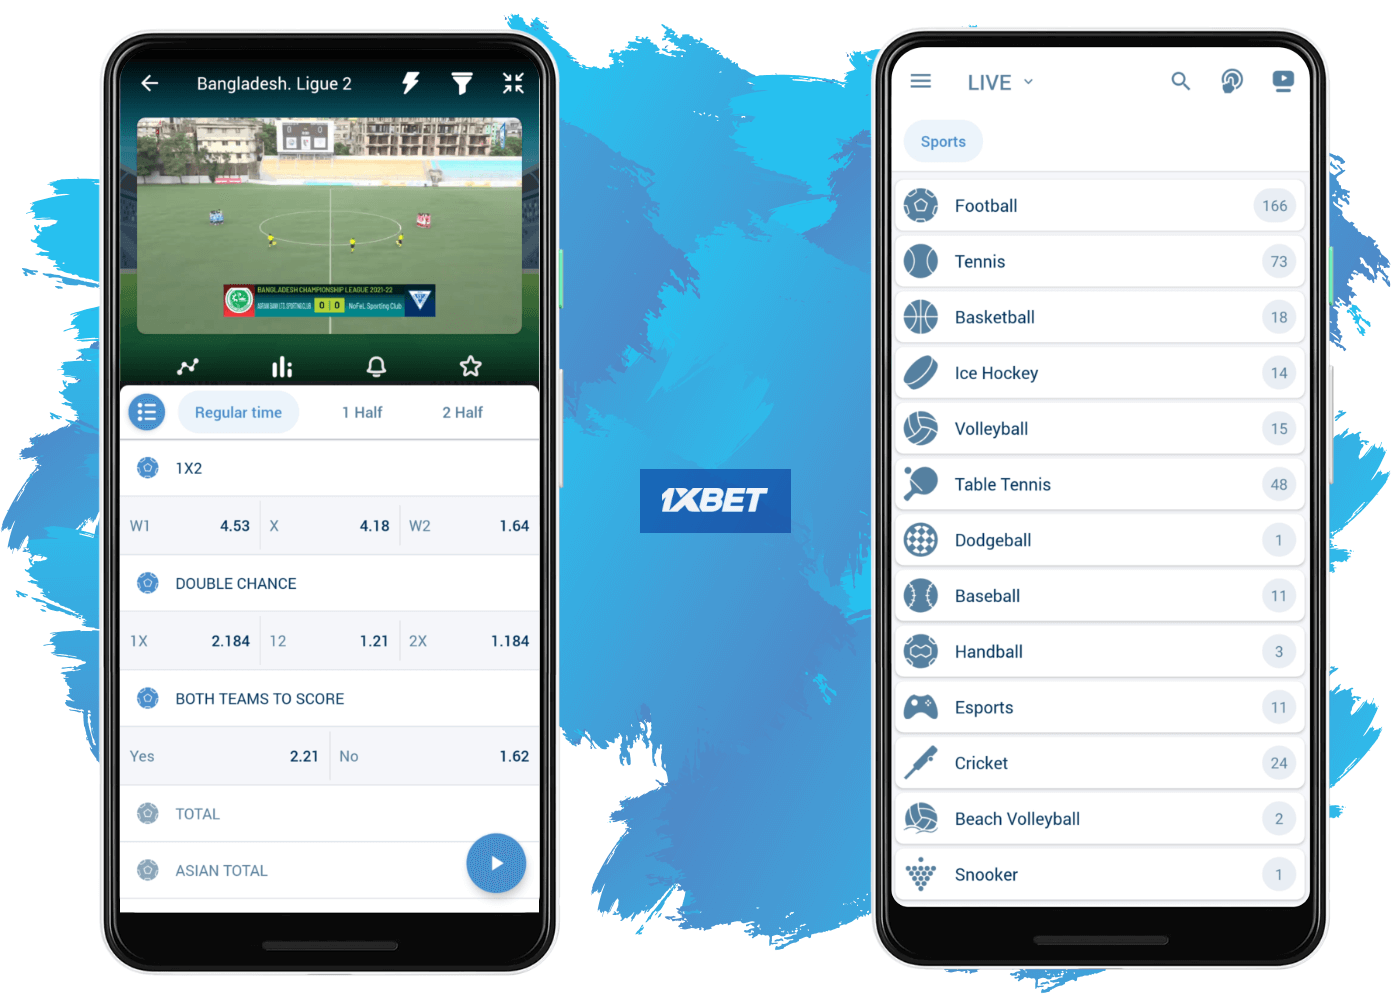 Betting Options at 1xbet App - push notification, match statistics, live streaming